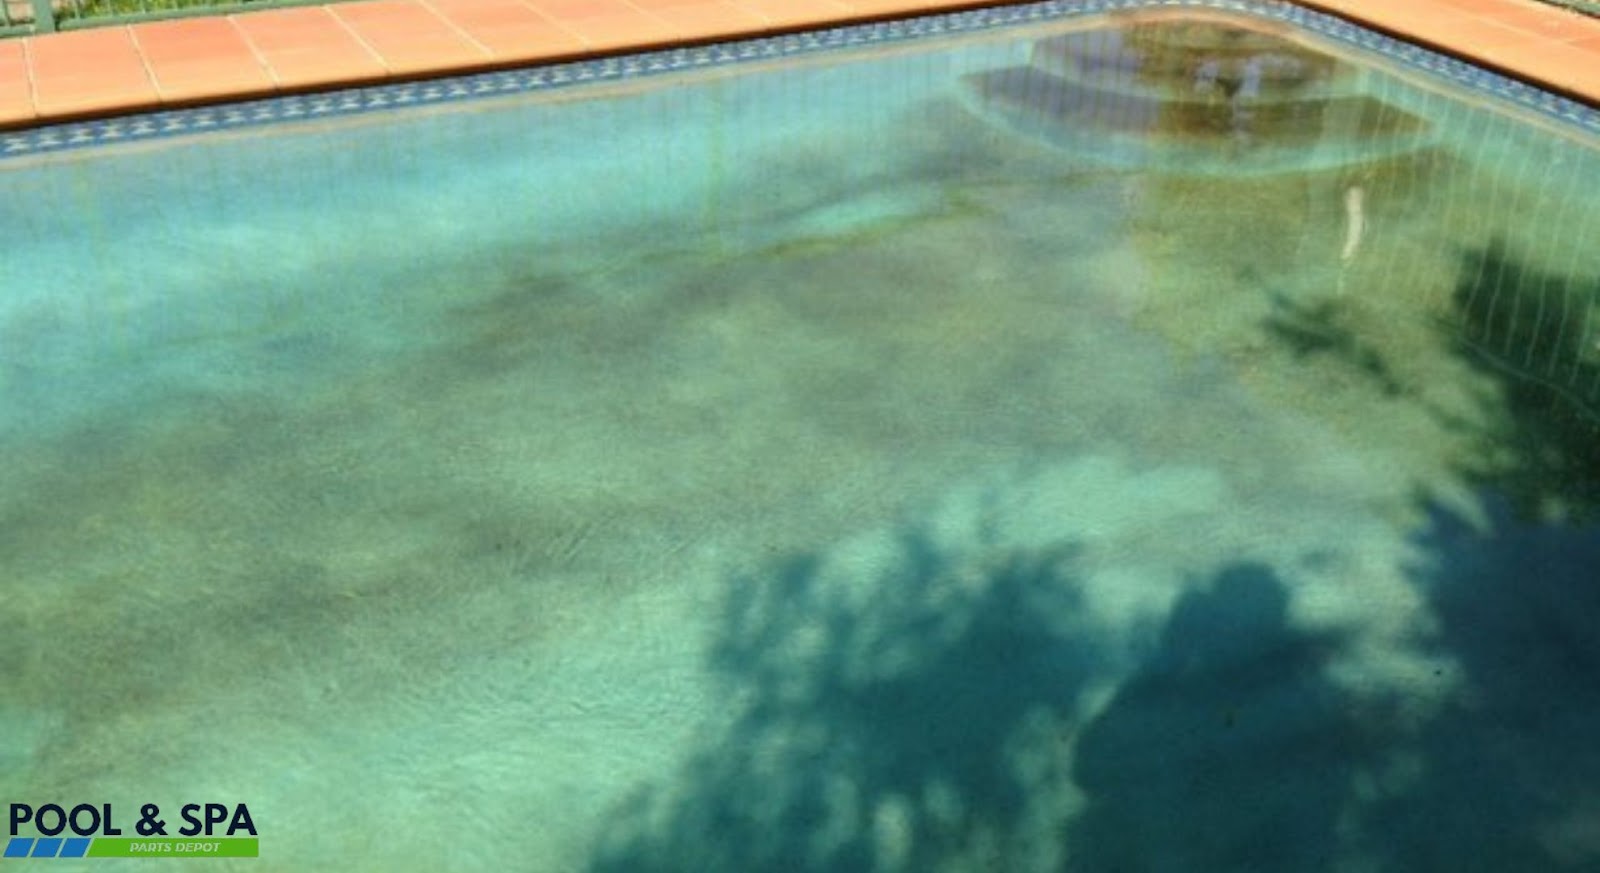 Stains in pool